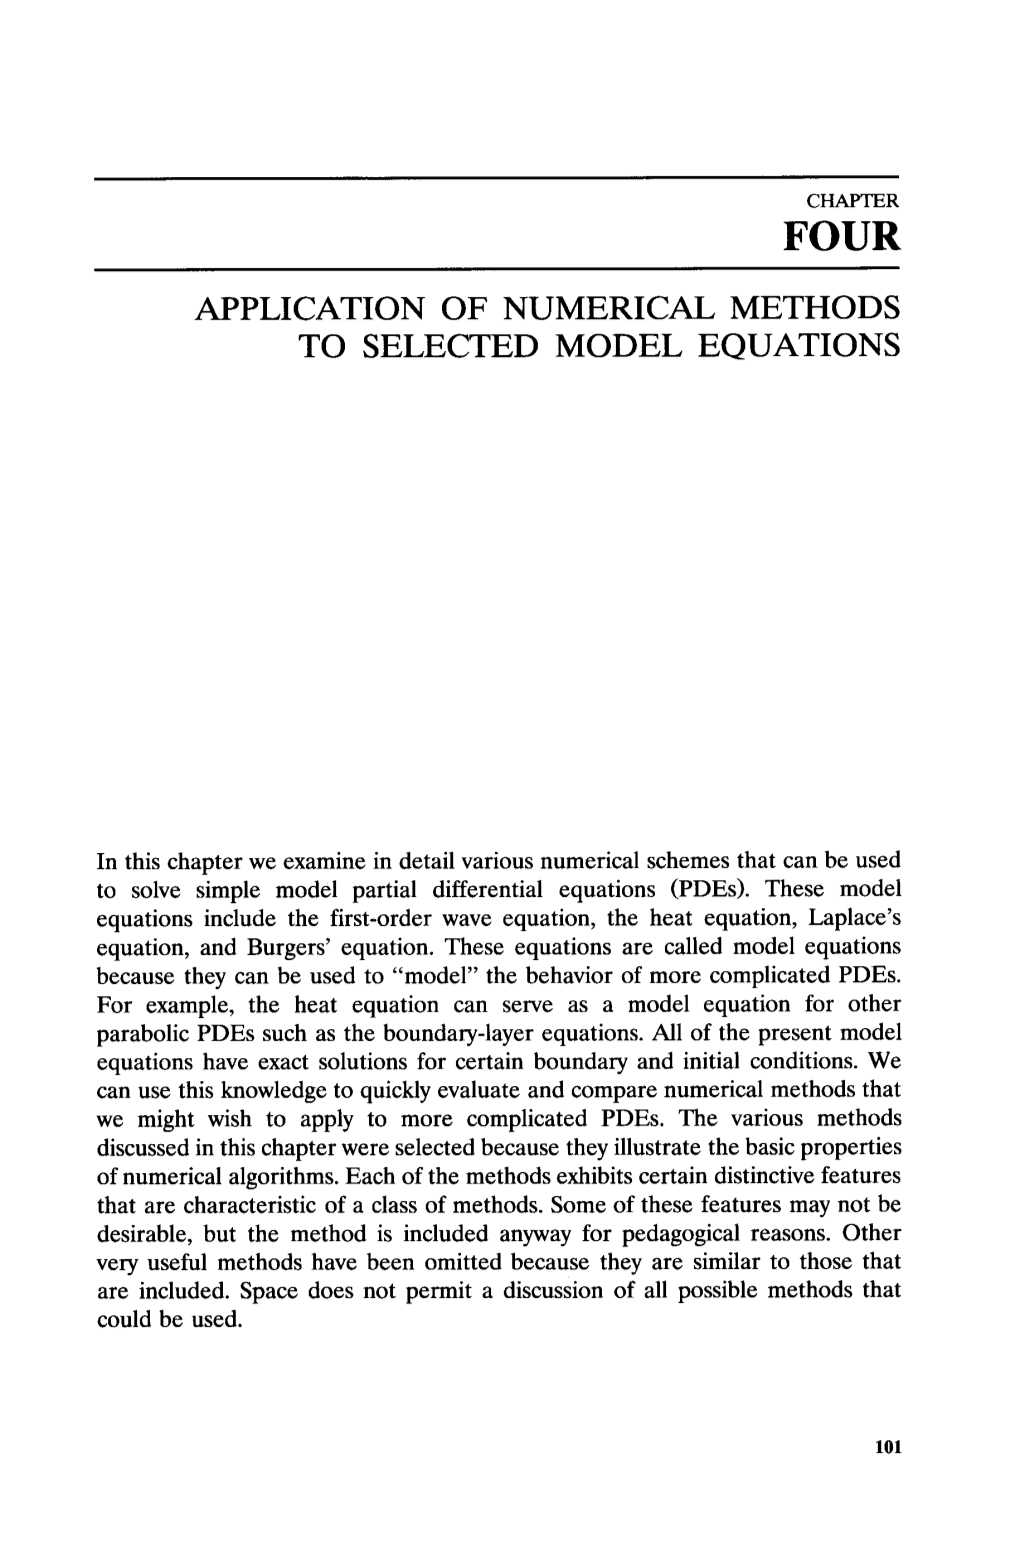 Application of Numerical Methods to Selected Model Equations